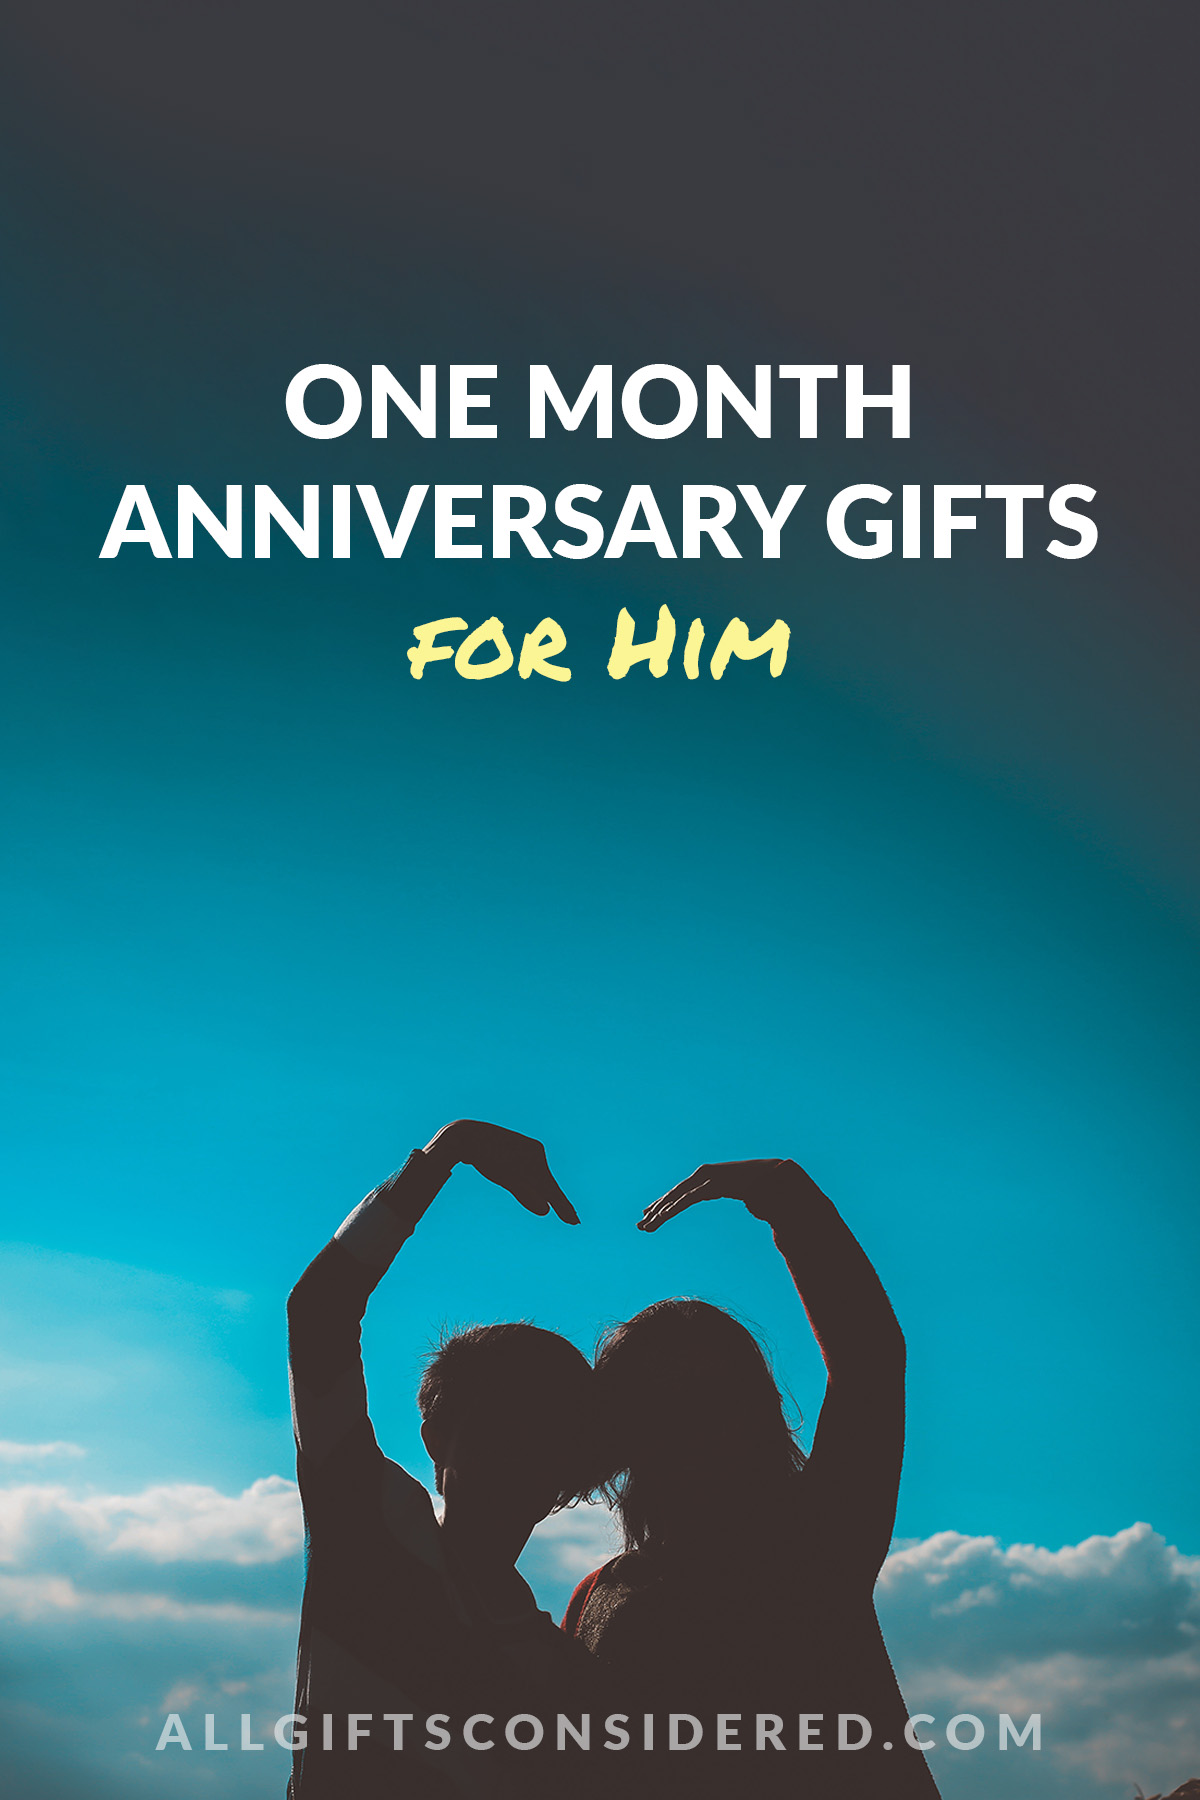 one month anniversary gifts for him - feature image